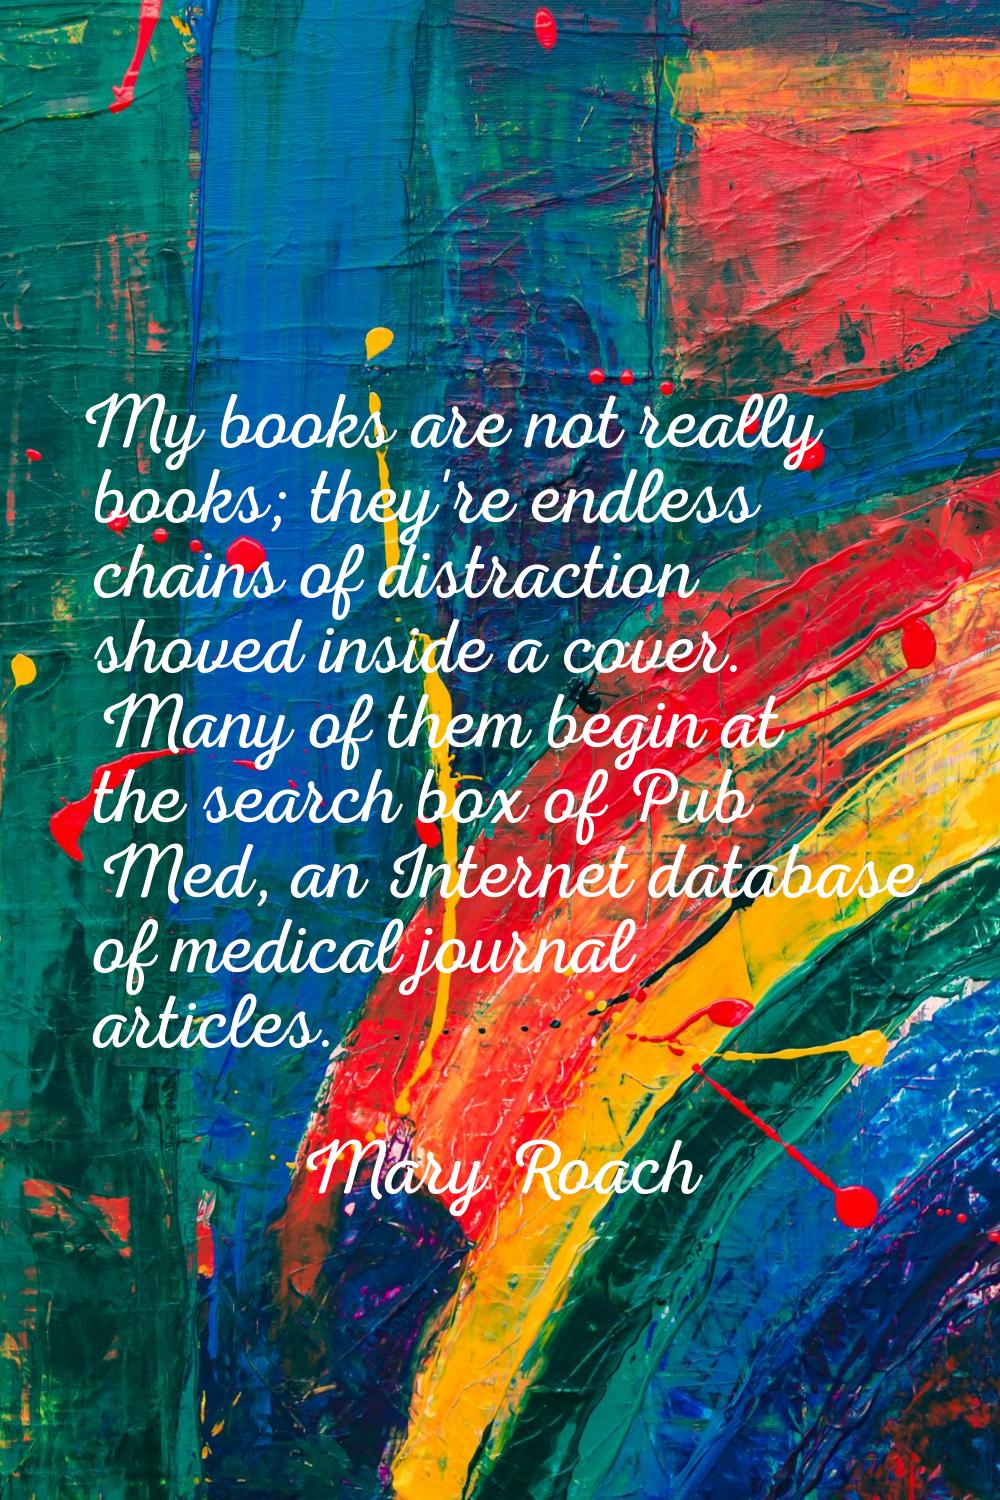 My books are not really books; they're endless chains of distraction shoved inside a cover. Many of